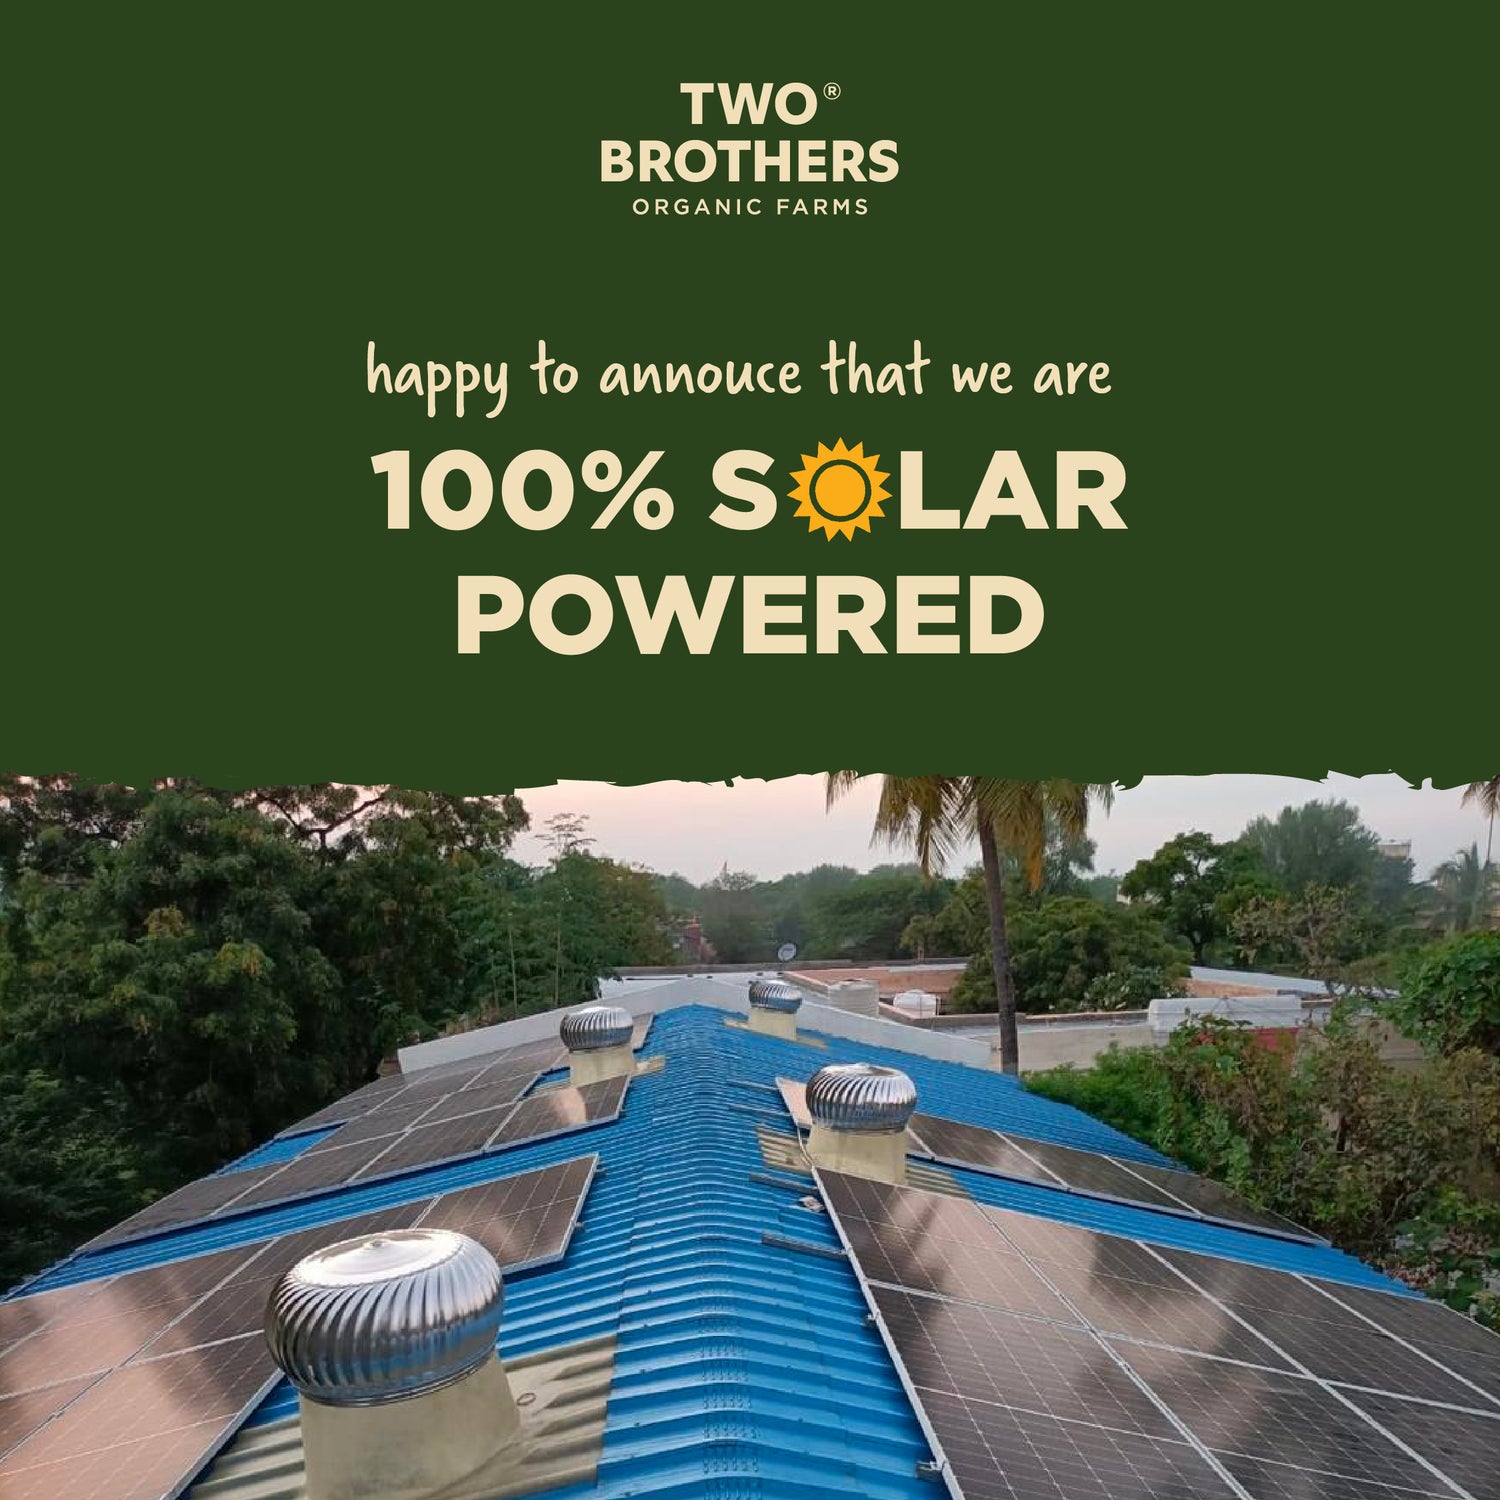 TBOF now has a 100% Solar Powered Plant